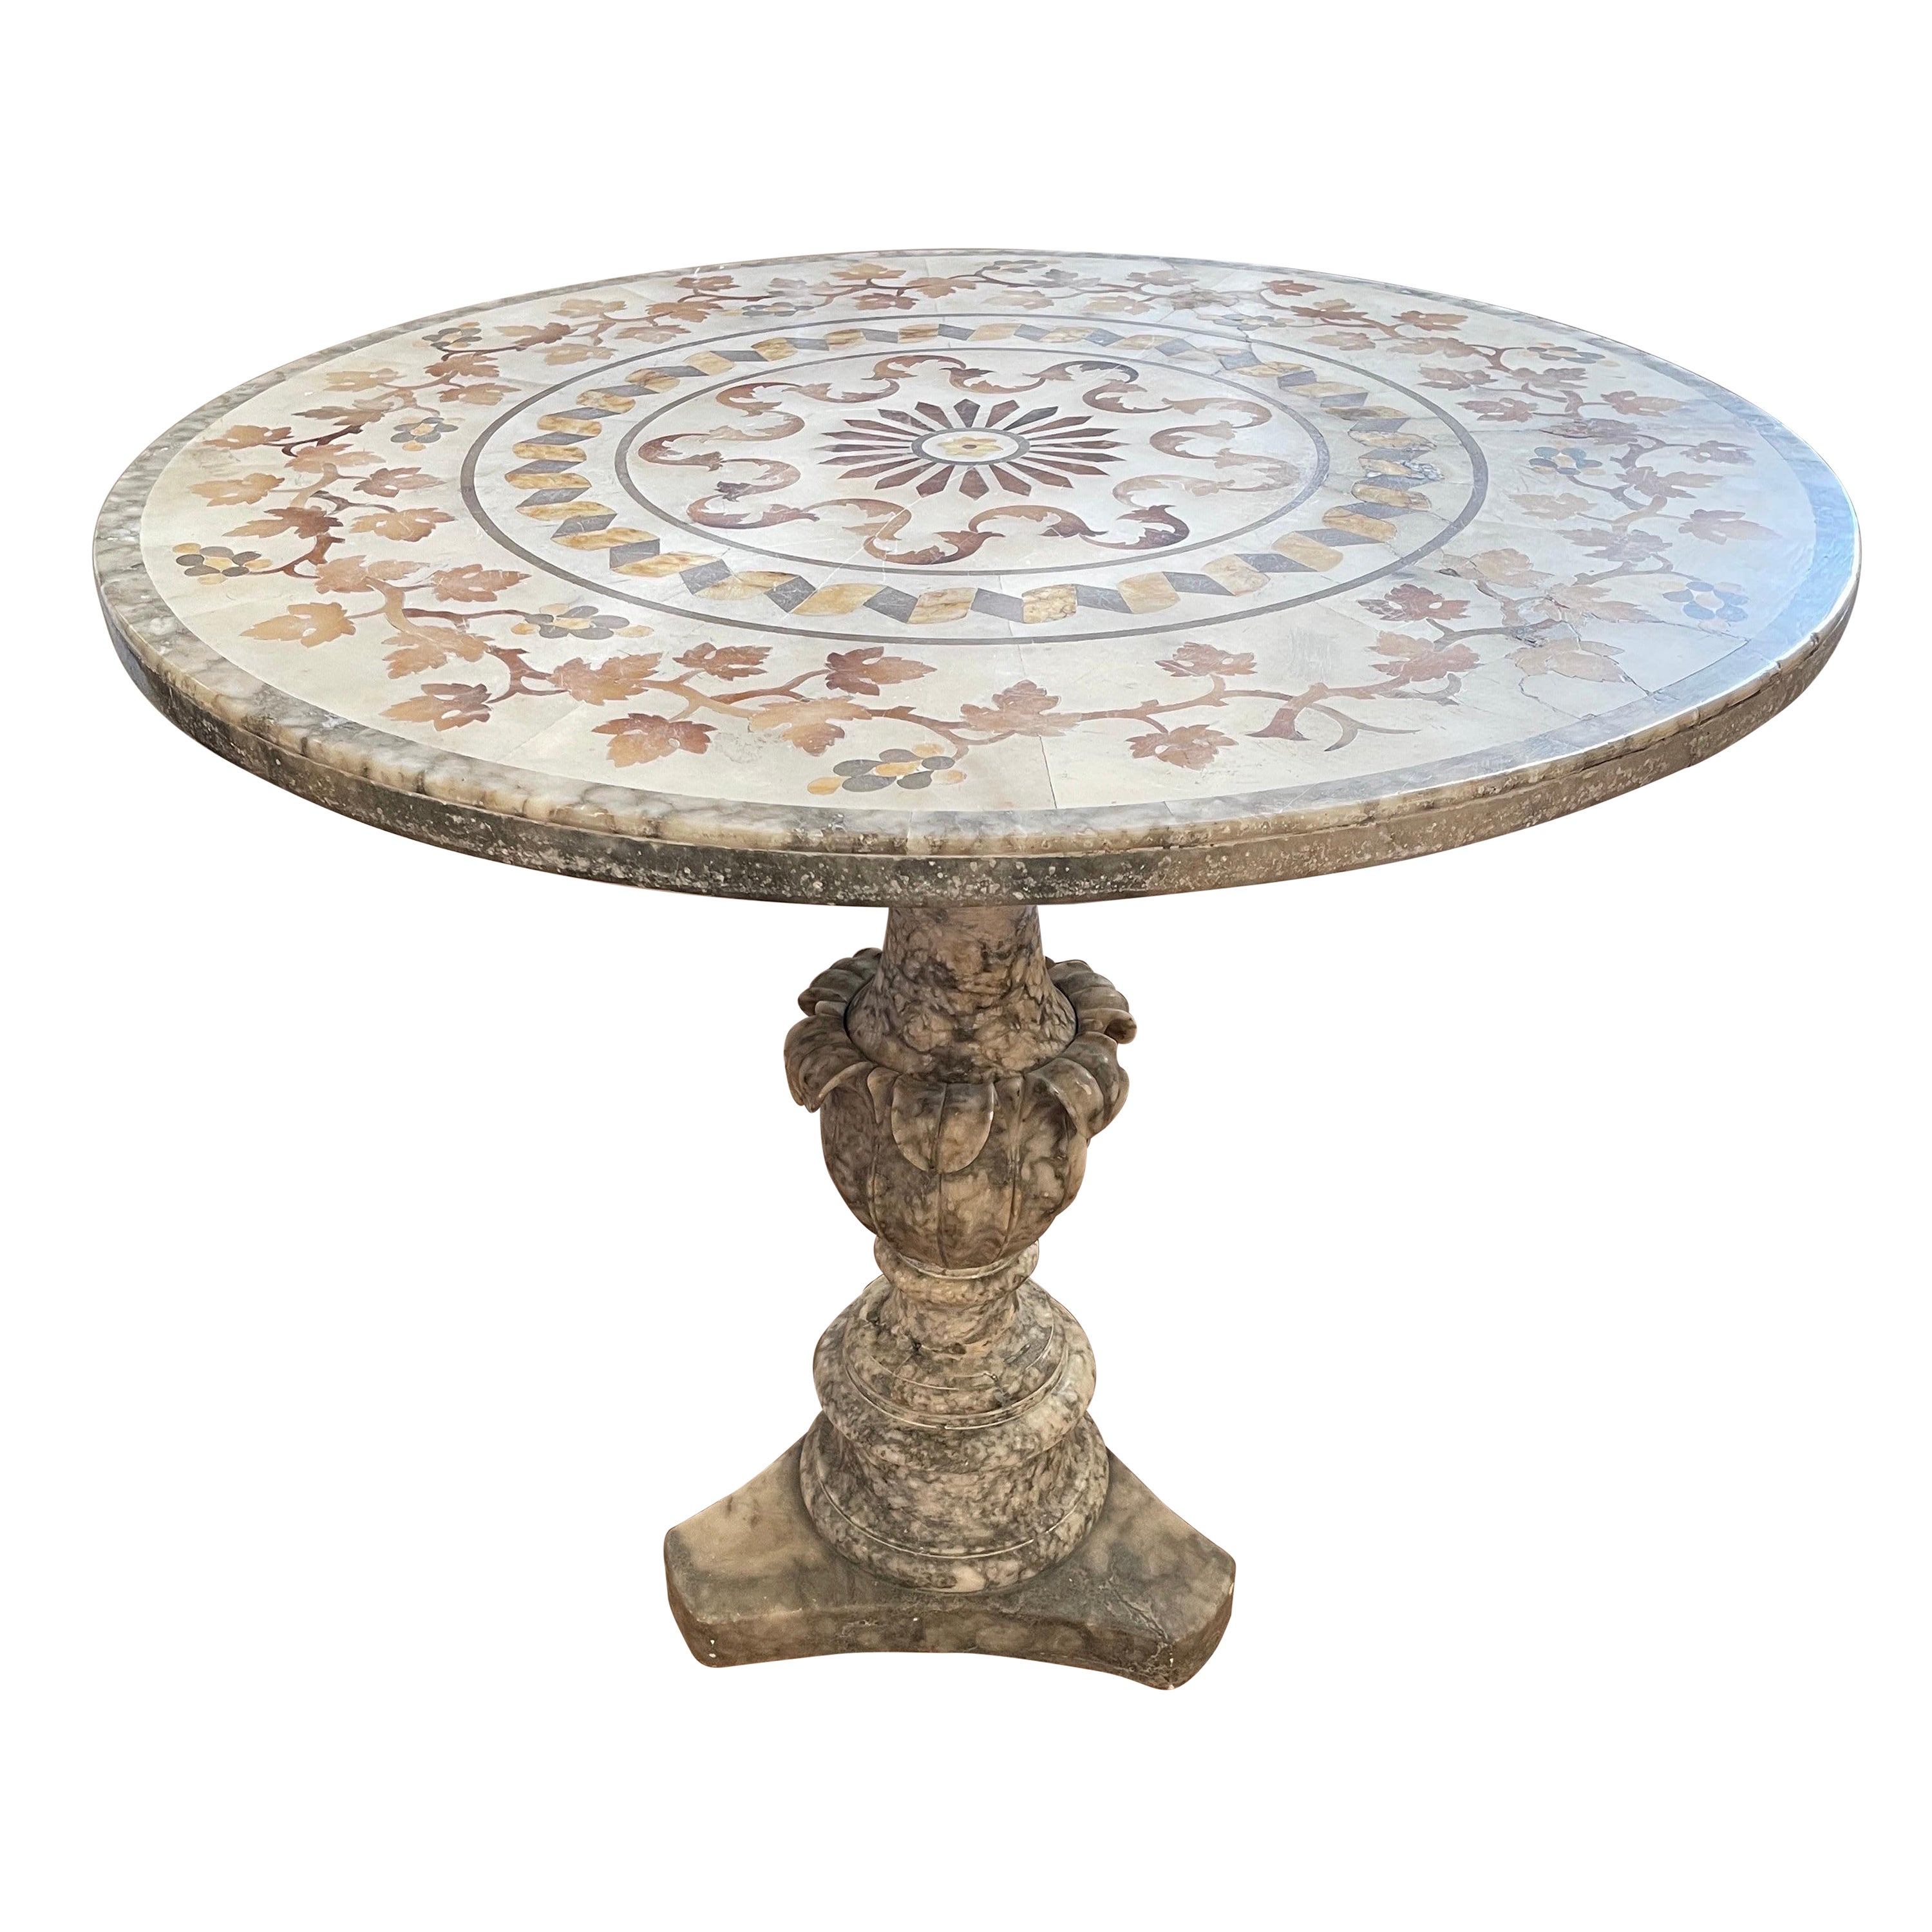 18th Century Italian Inlaid Pietra Dura Pedestal Table In Alabaster And Marble For Sale